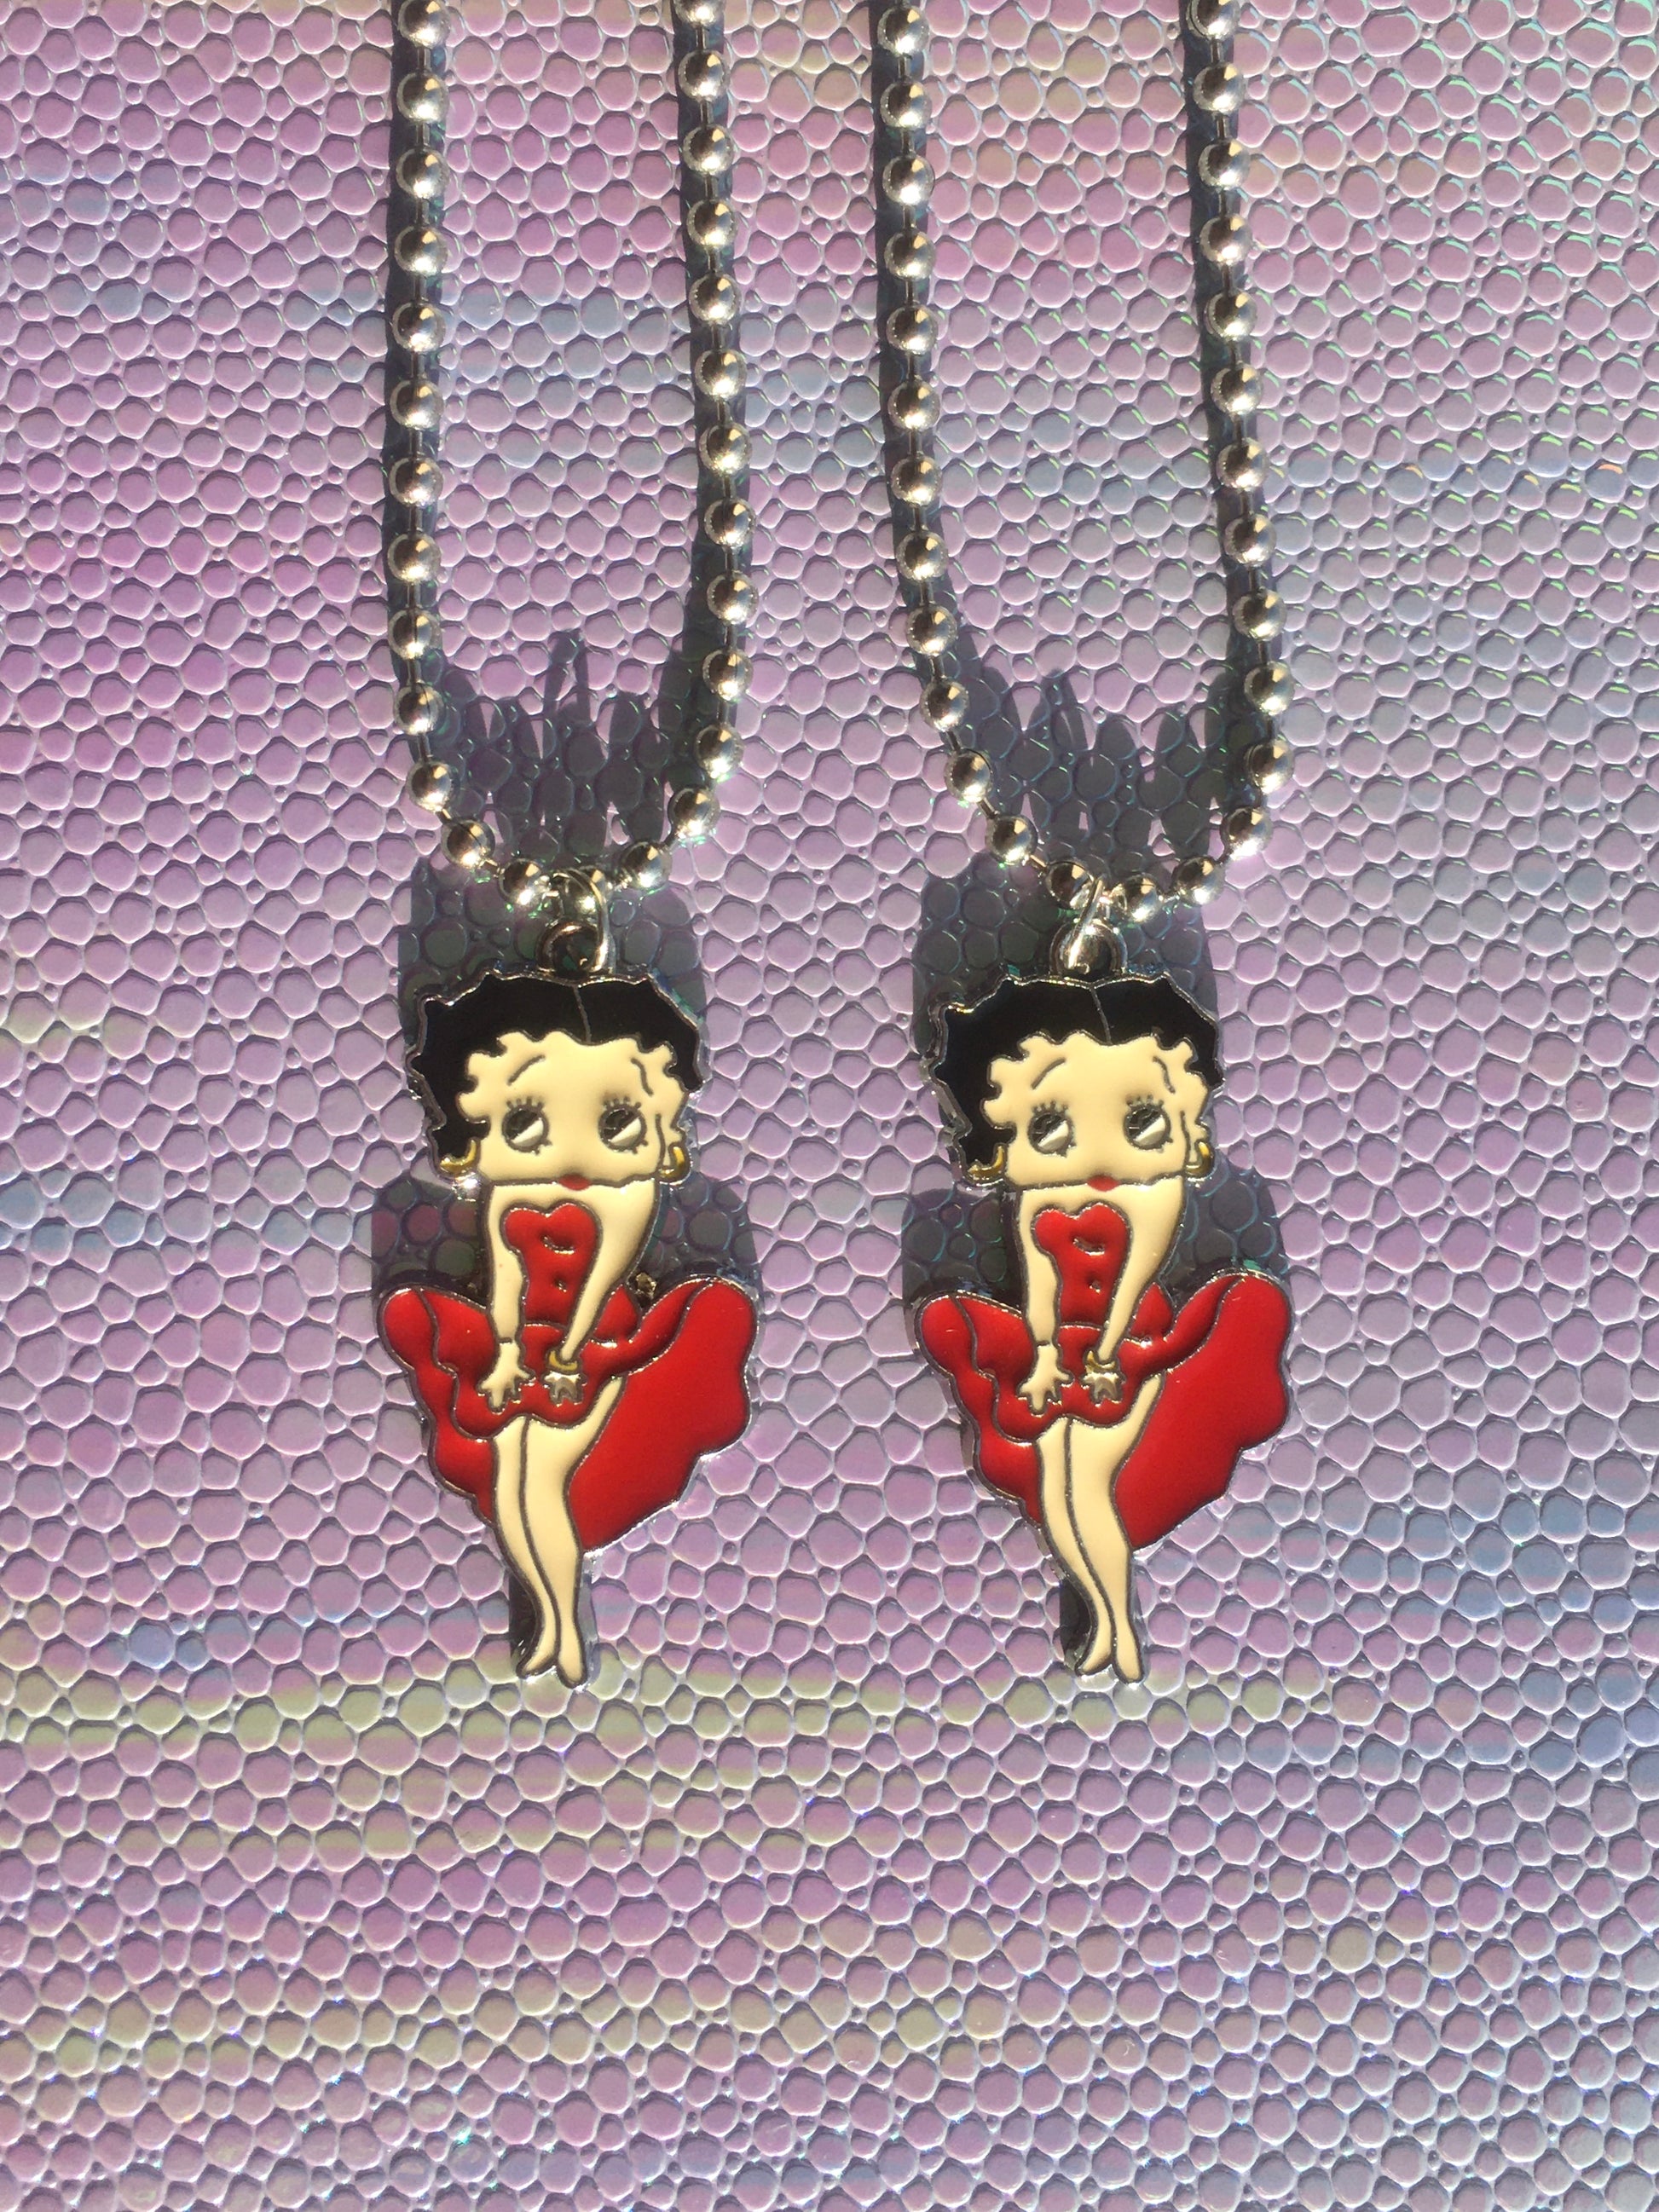 Black chain Betty Boop necklace pop culture Hollywood classic